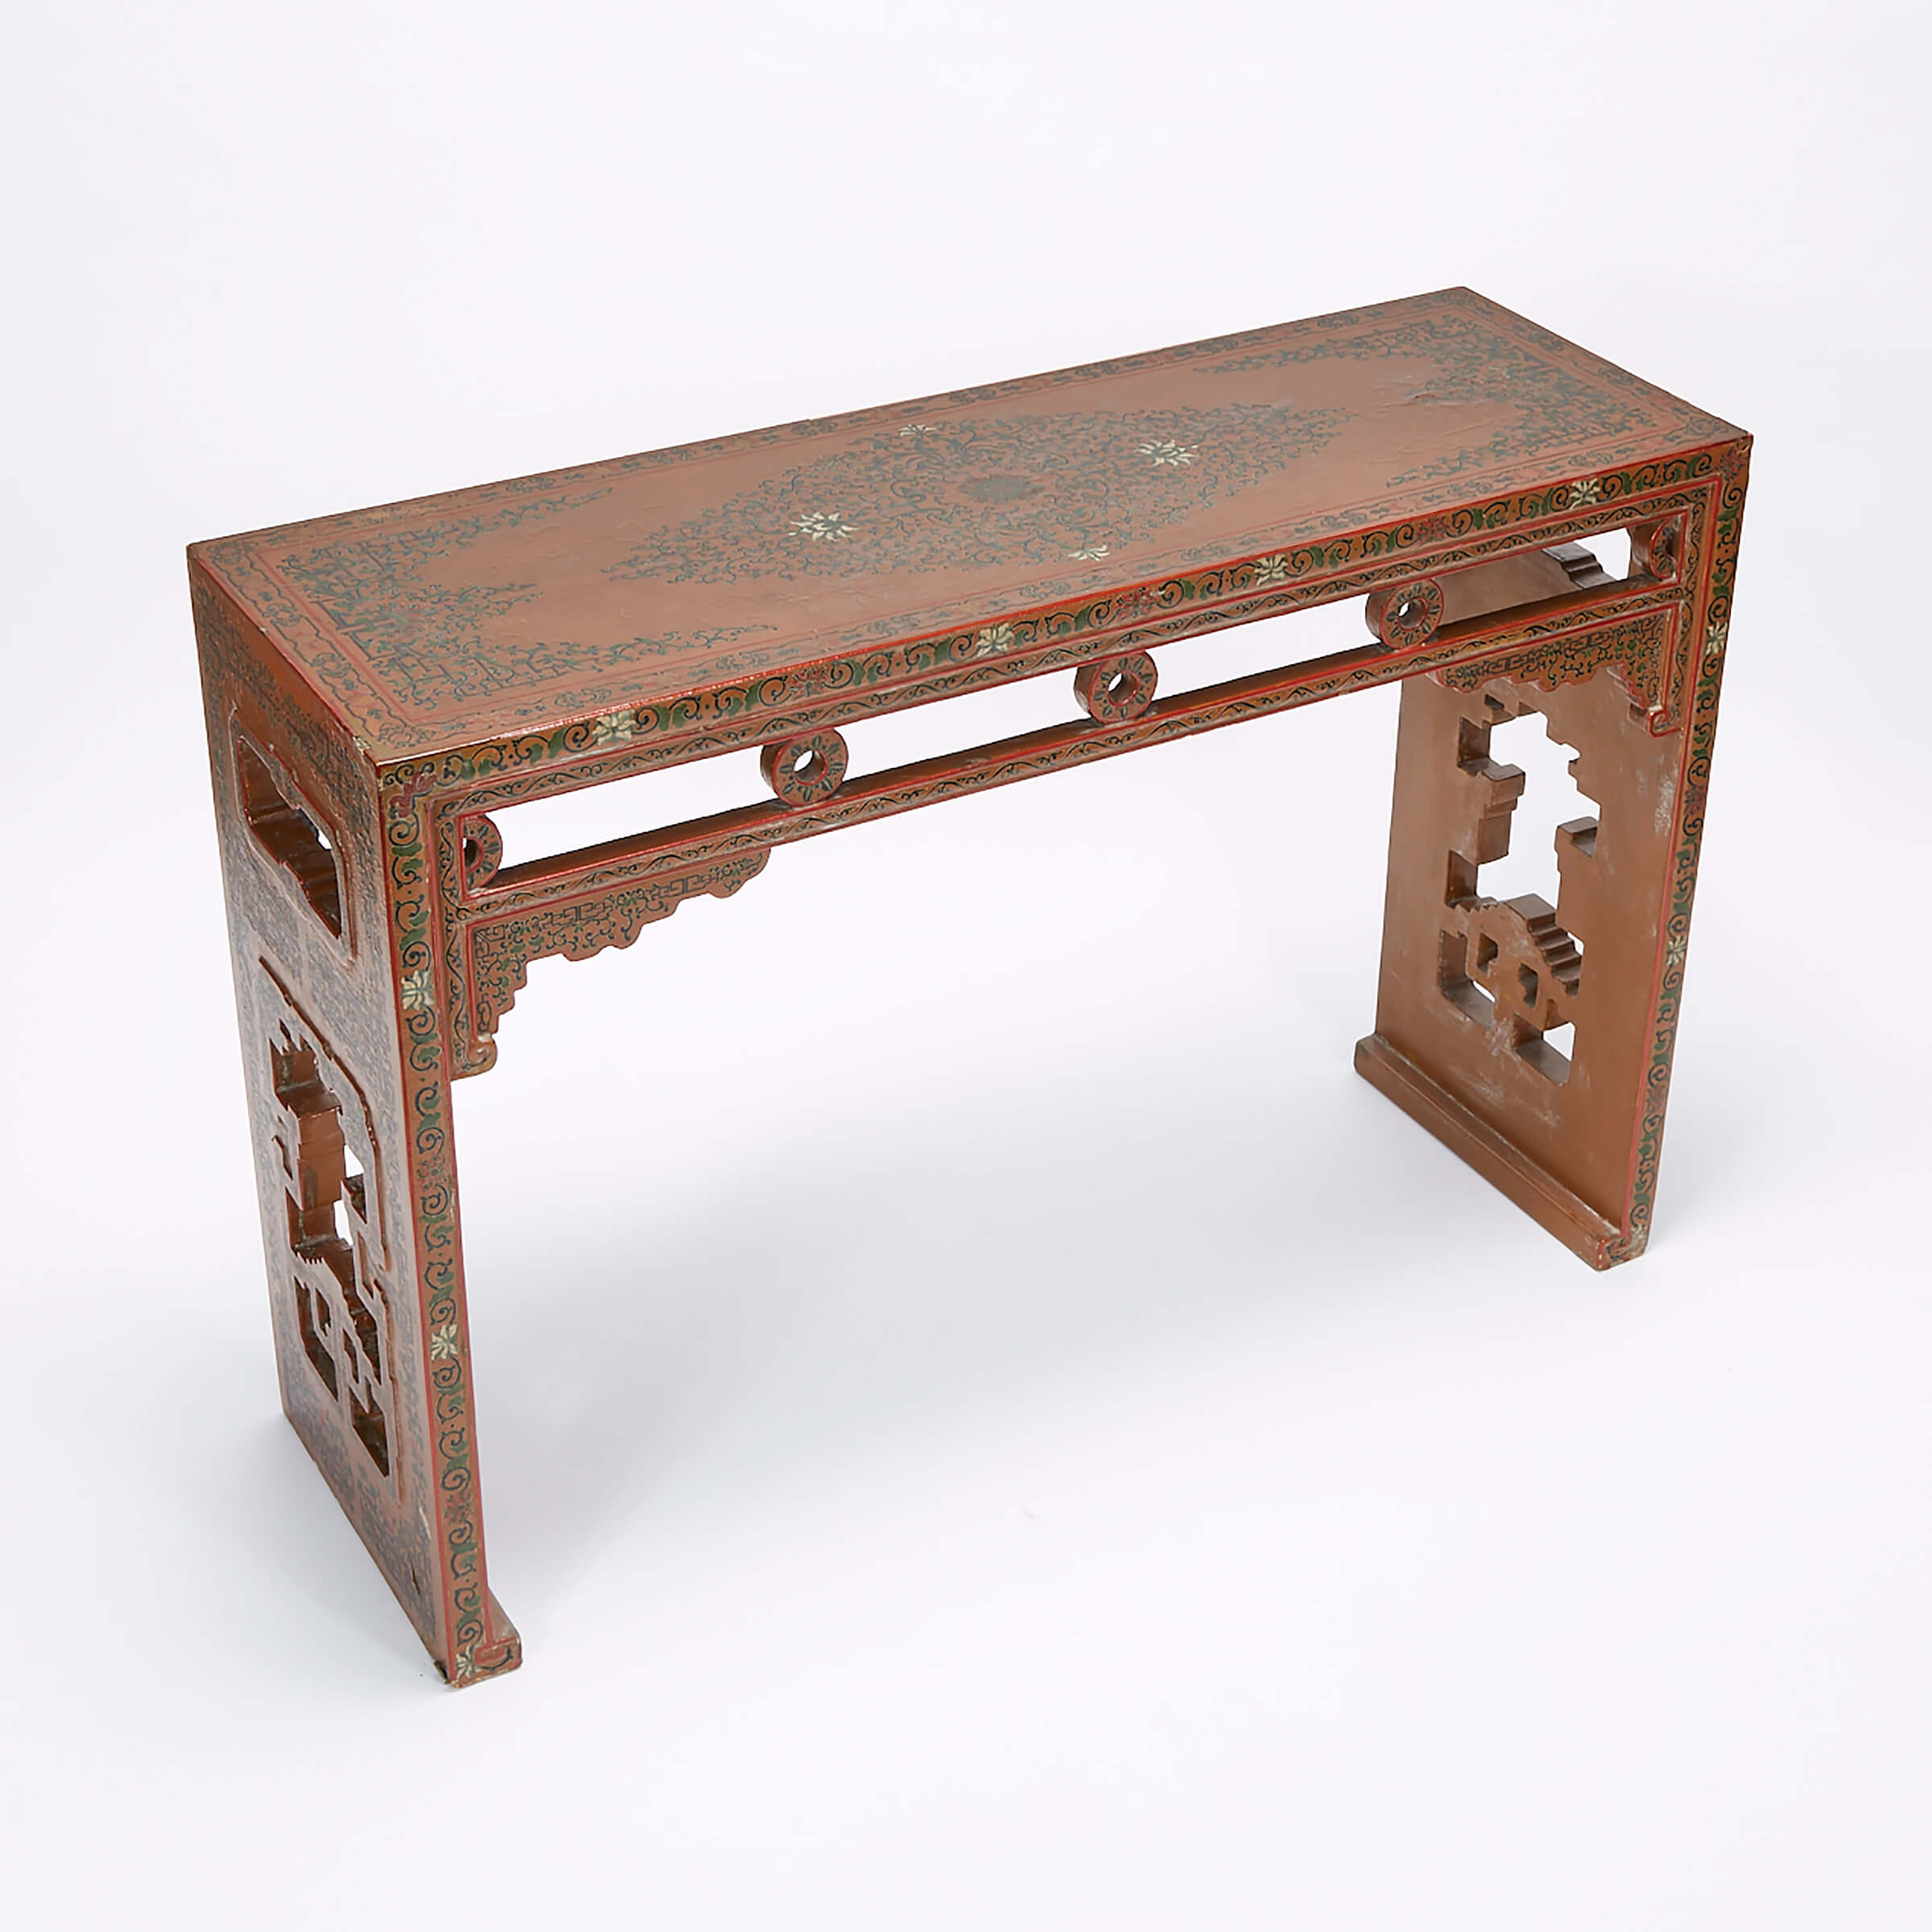 A Brown Lacquer Long Table, 19th Century